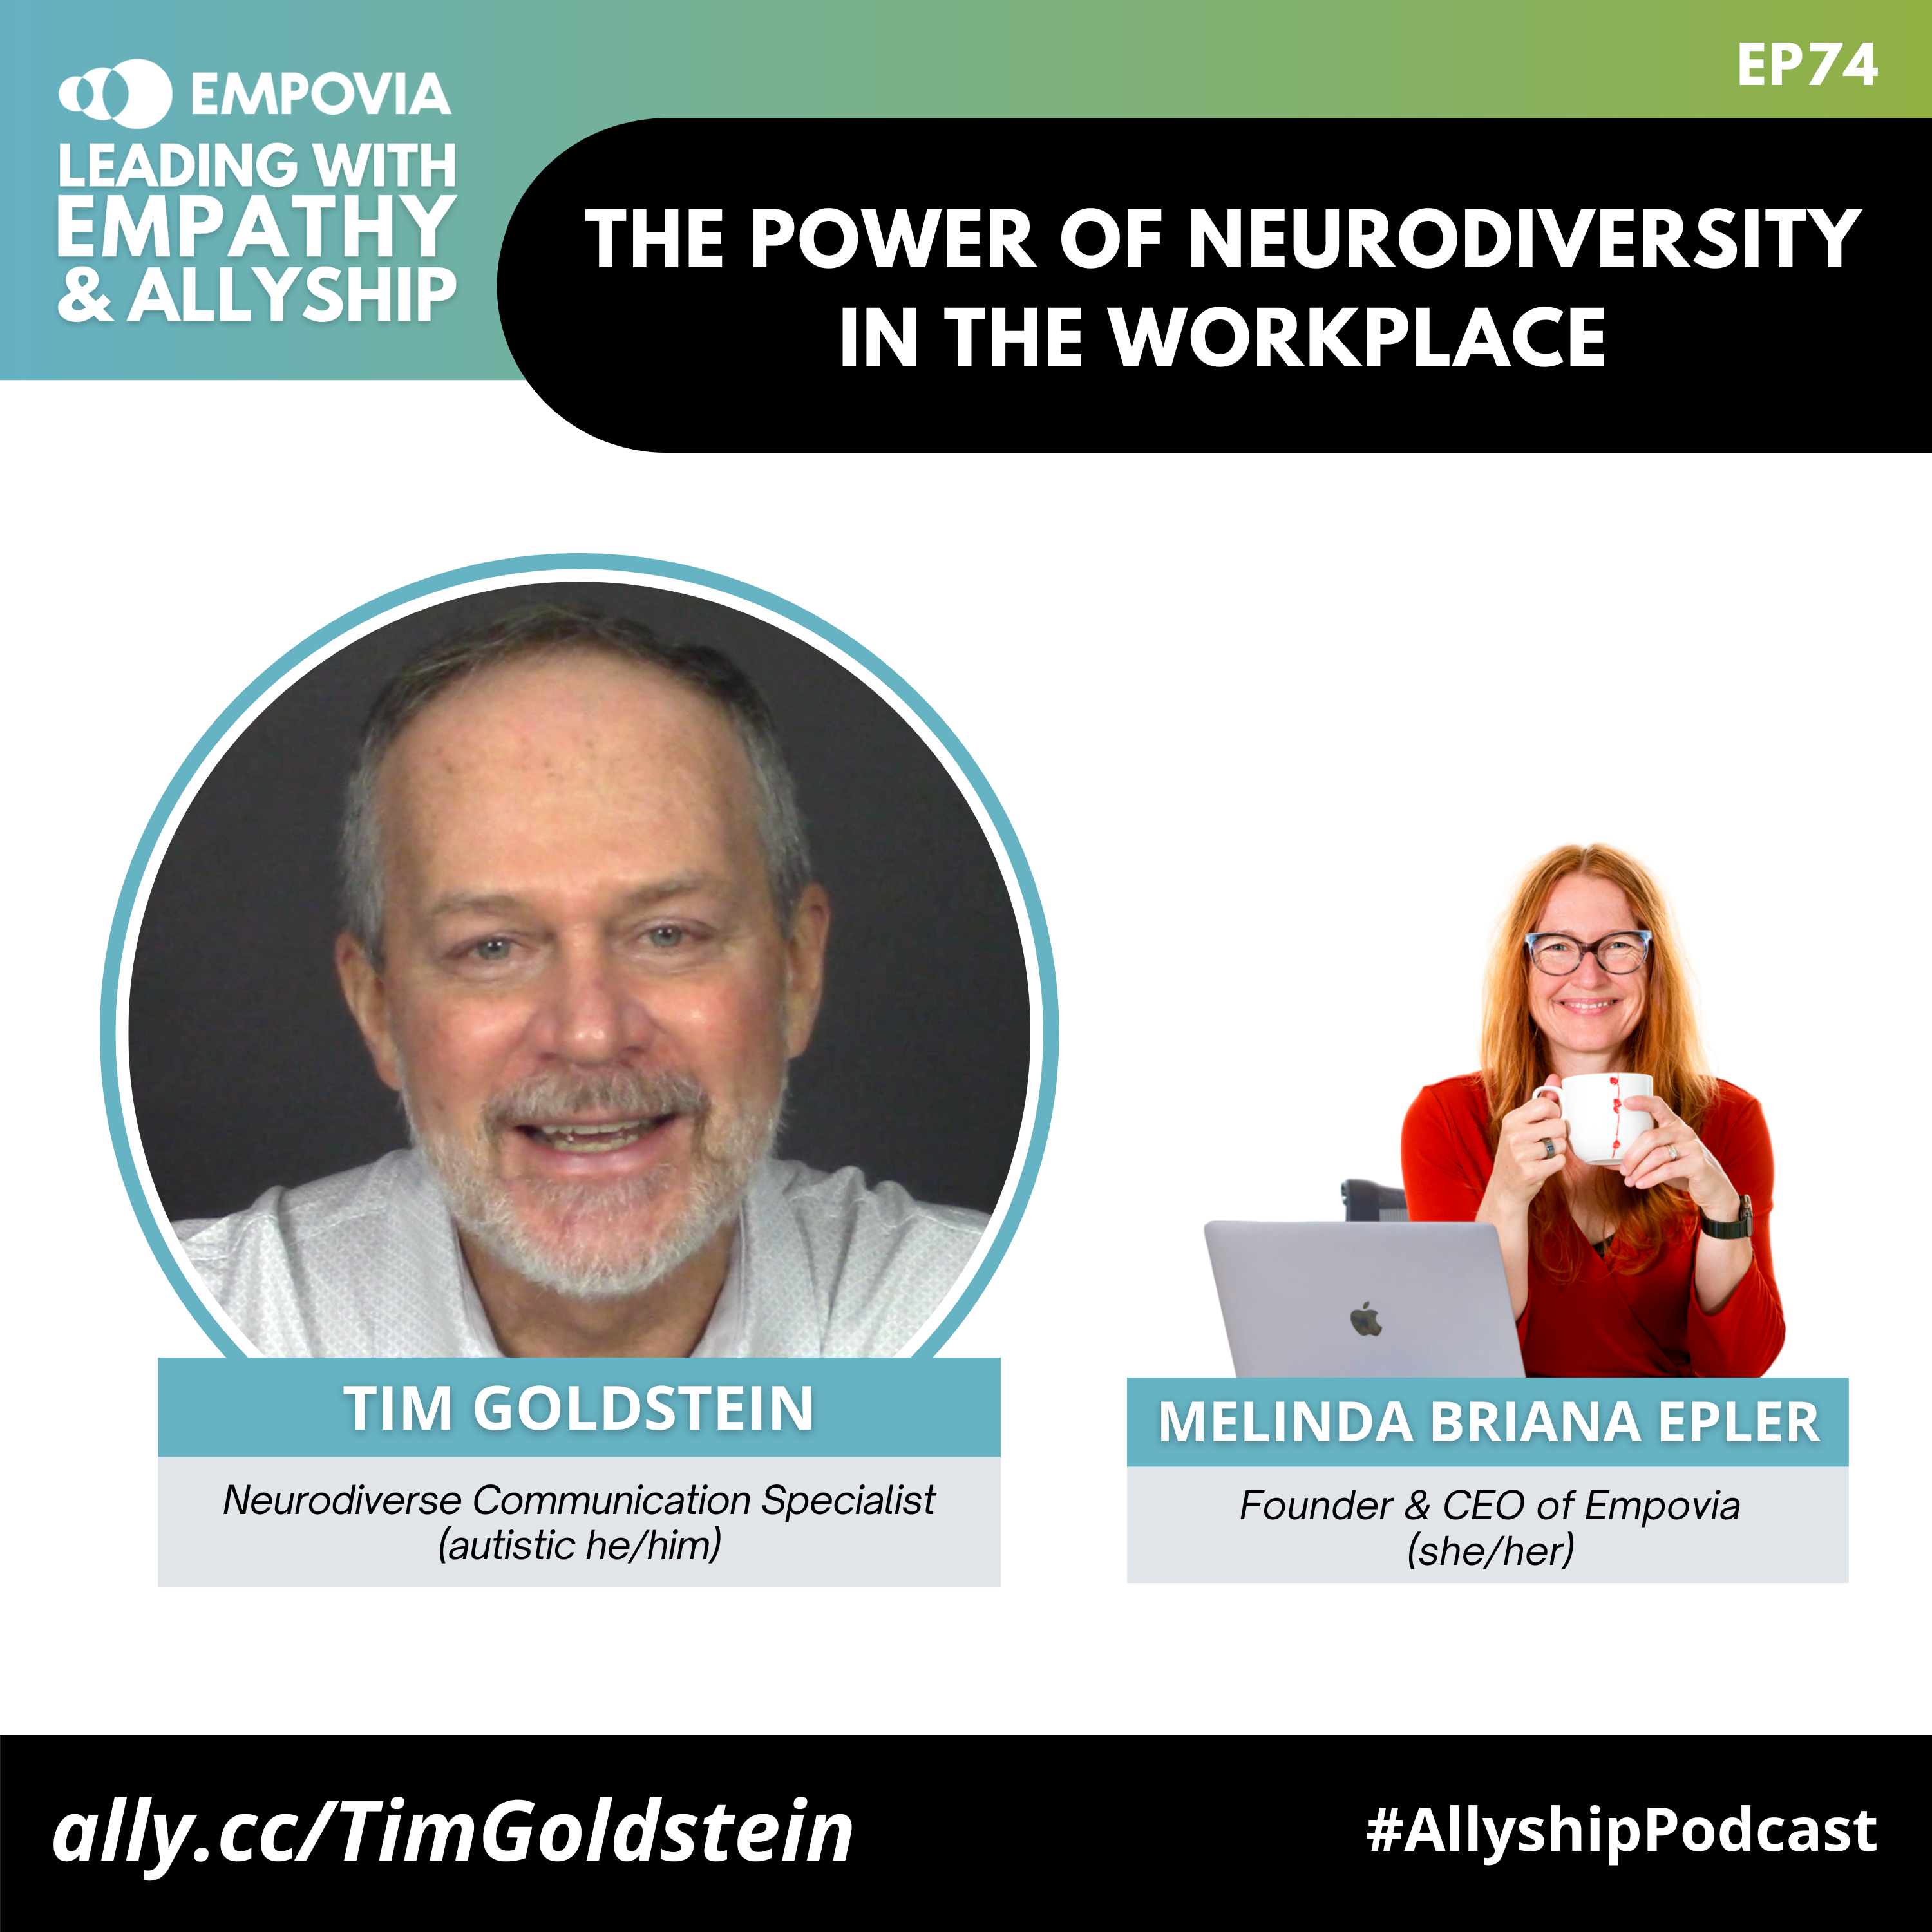 Leading With Empathy & Allyship promo with the Empovia logo and photos of Tim Goldstein, a White cis male with grey hair and facial hair who is wearing a white shirt and smiling at the camera, and host Melinda Briana Epler, a White woman with red hair, glasses, and an orange shirt holding a white mug behind a laptop.